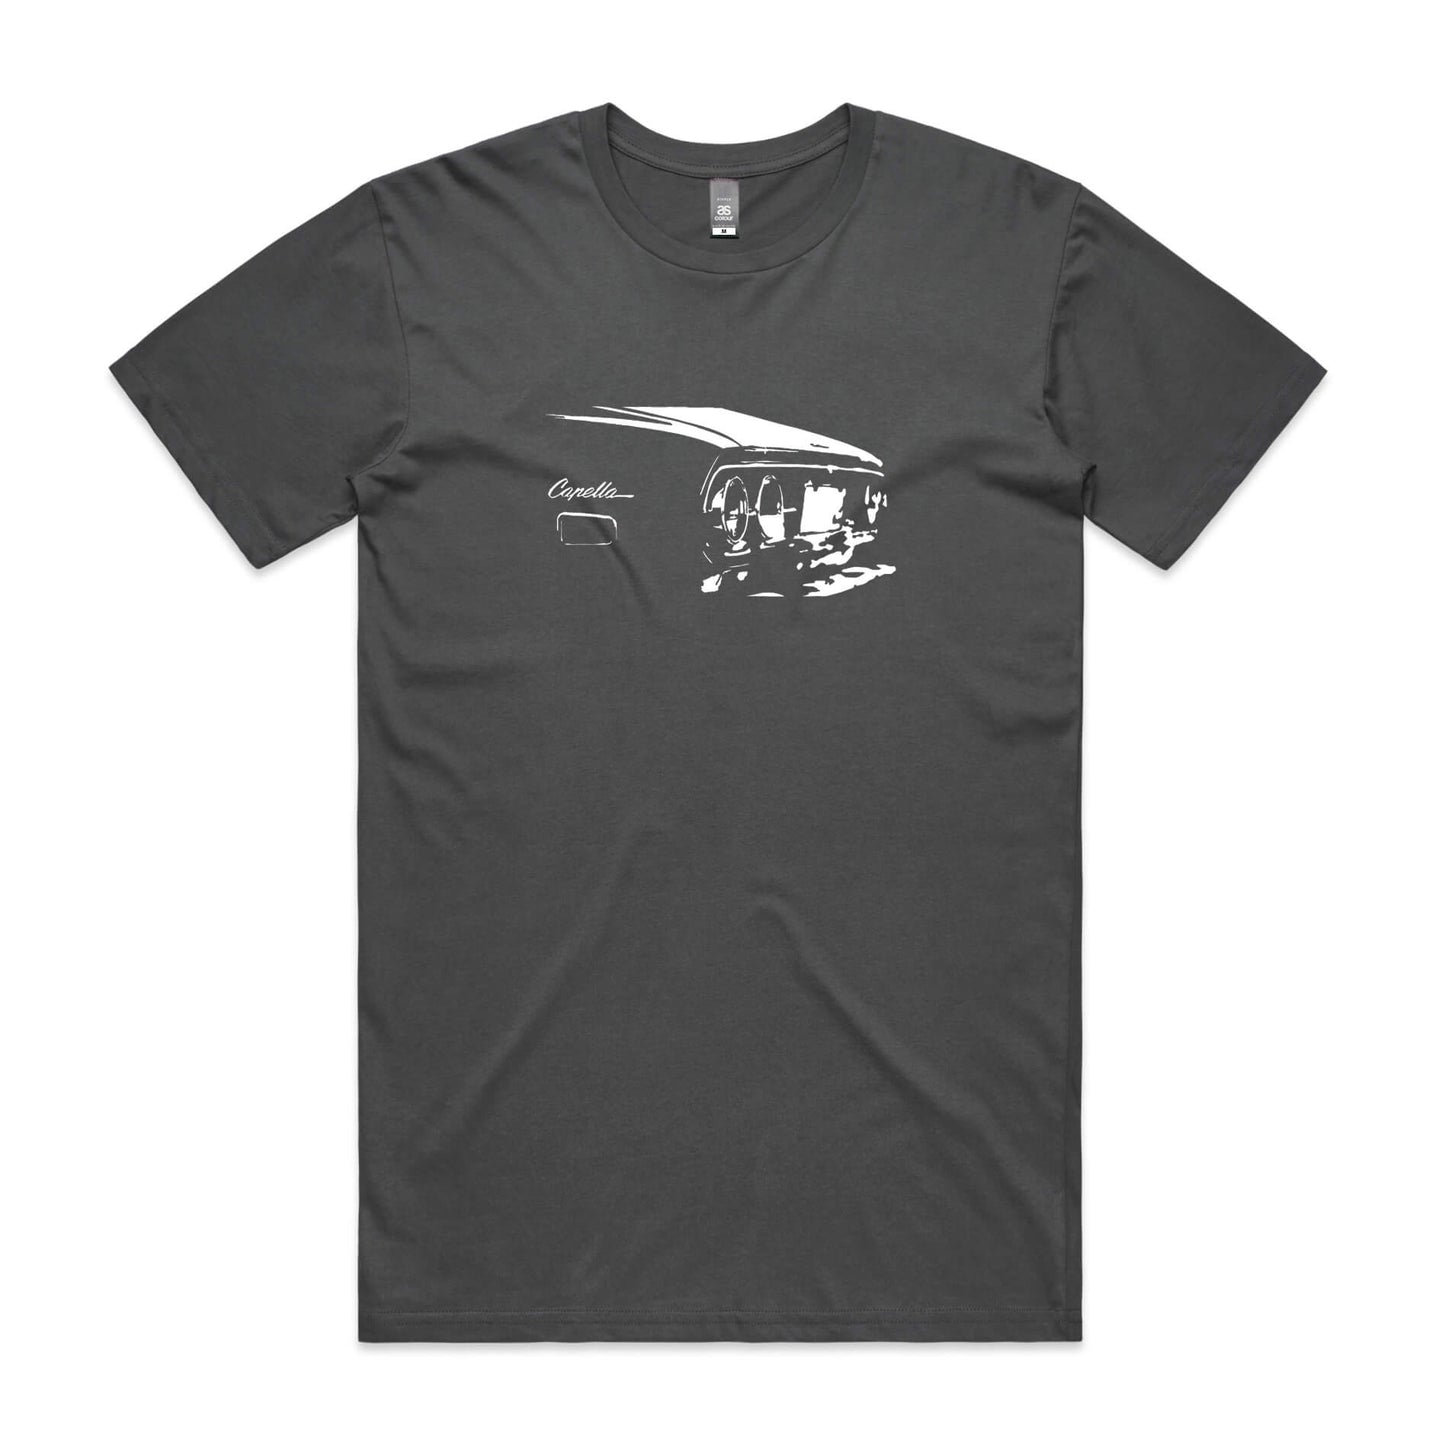 Mazda Capella t-shirt in charcoal grey with white RX2 car graphic